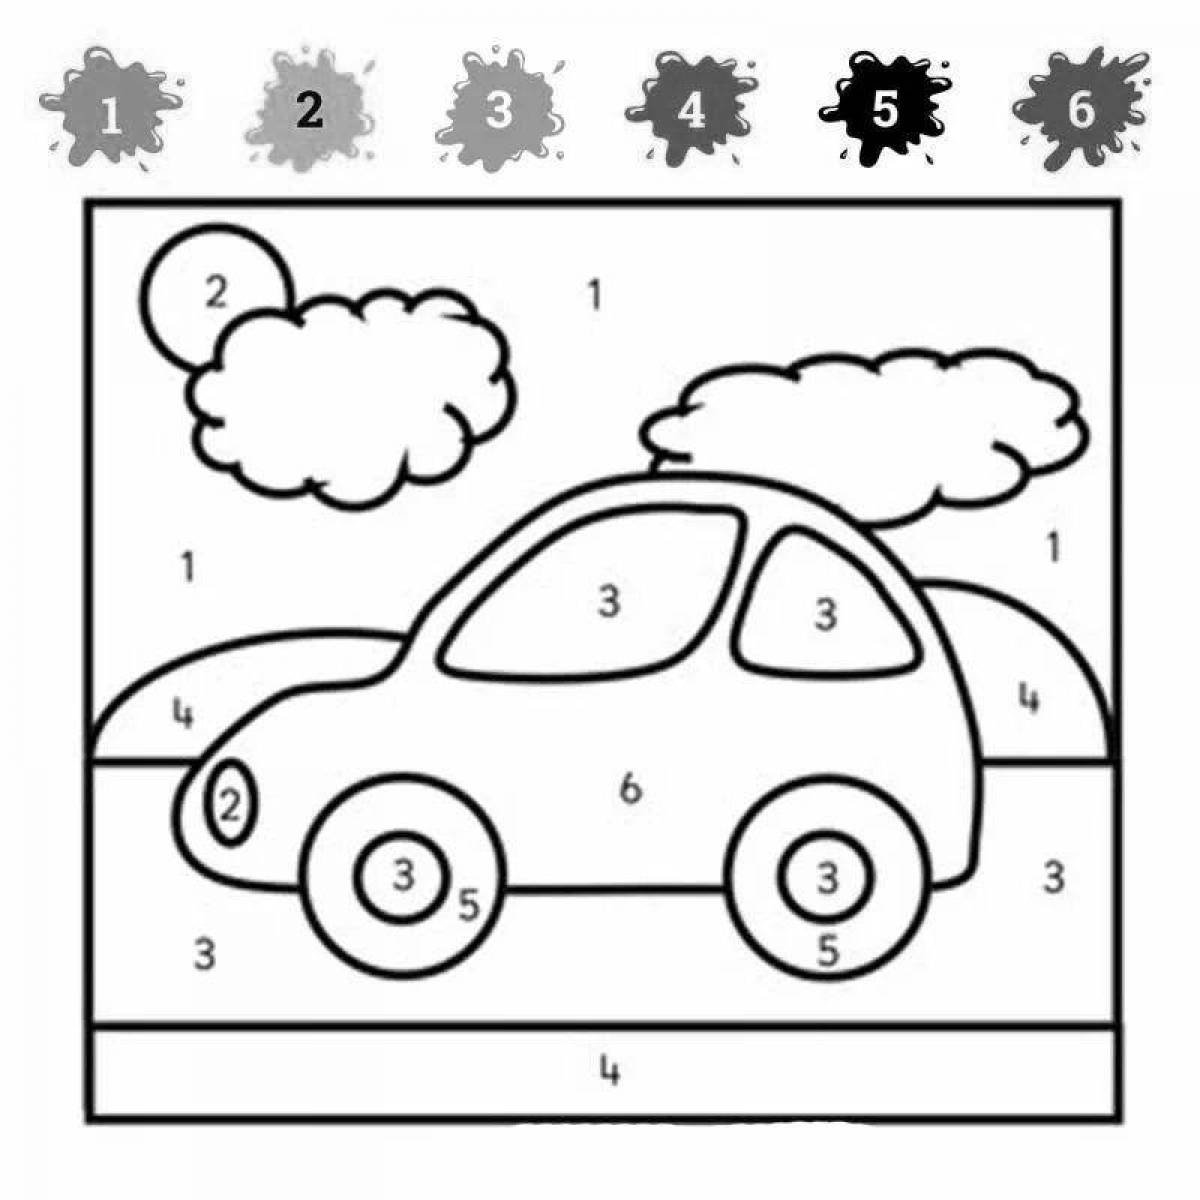 Fun transport by numbers coloring book